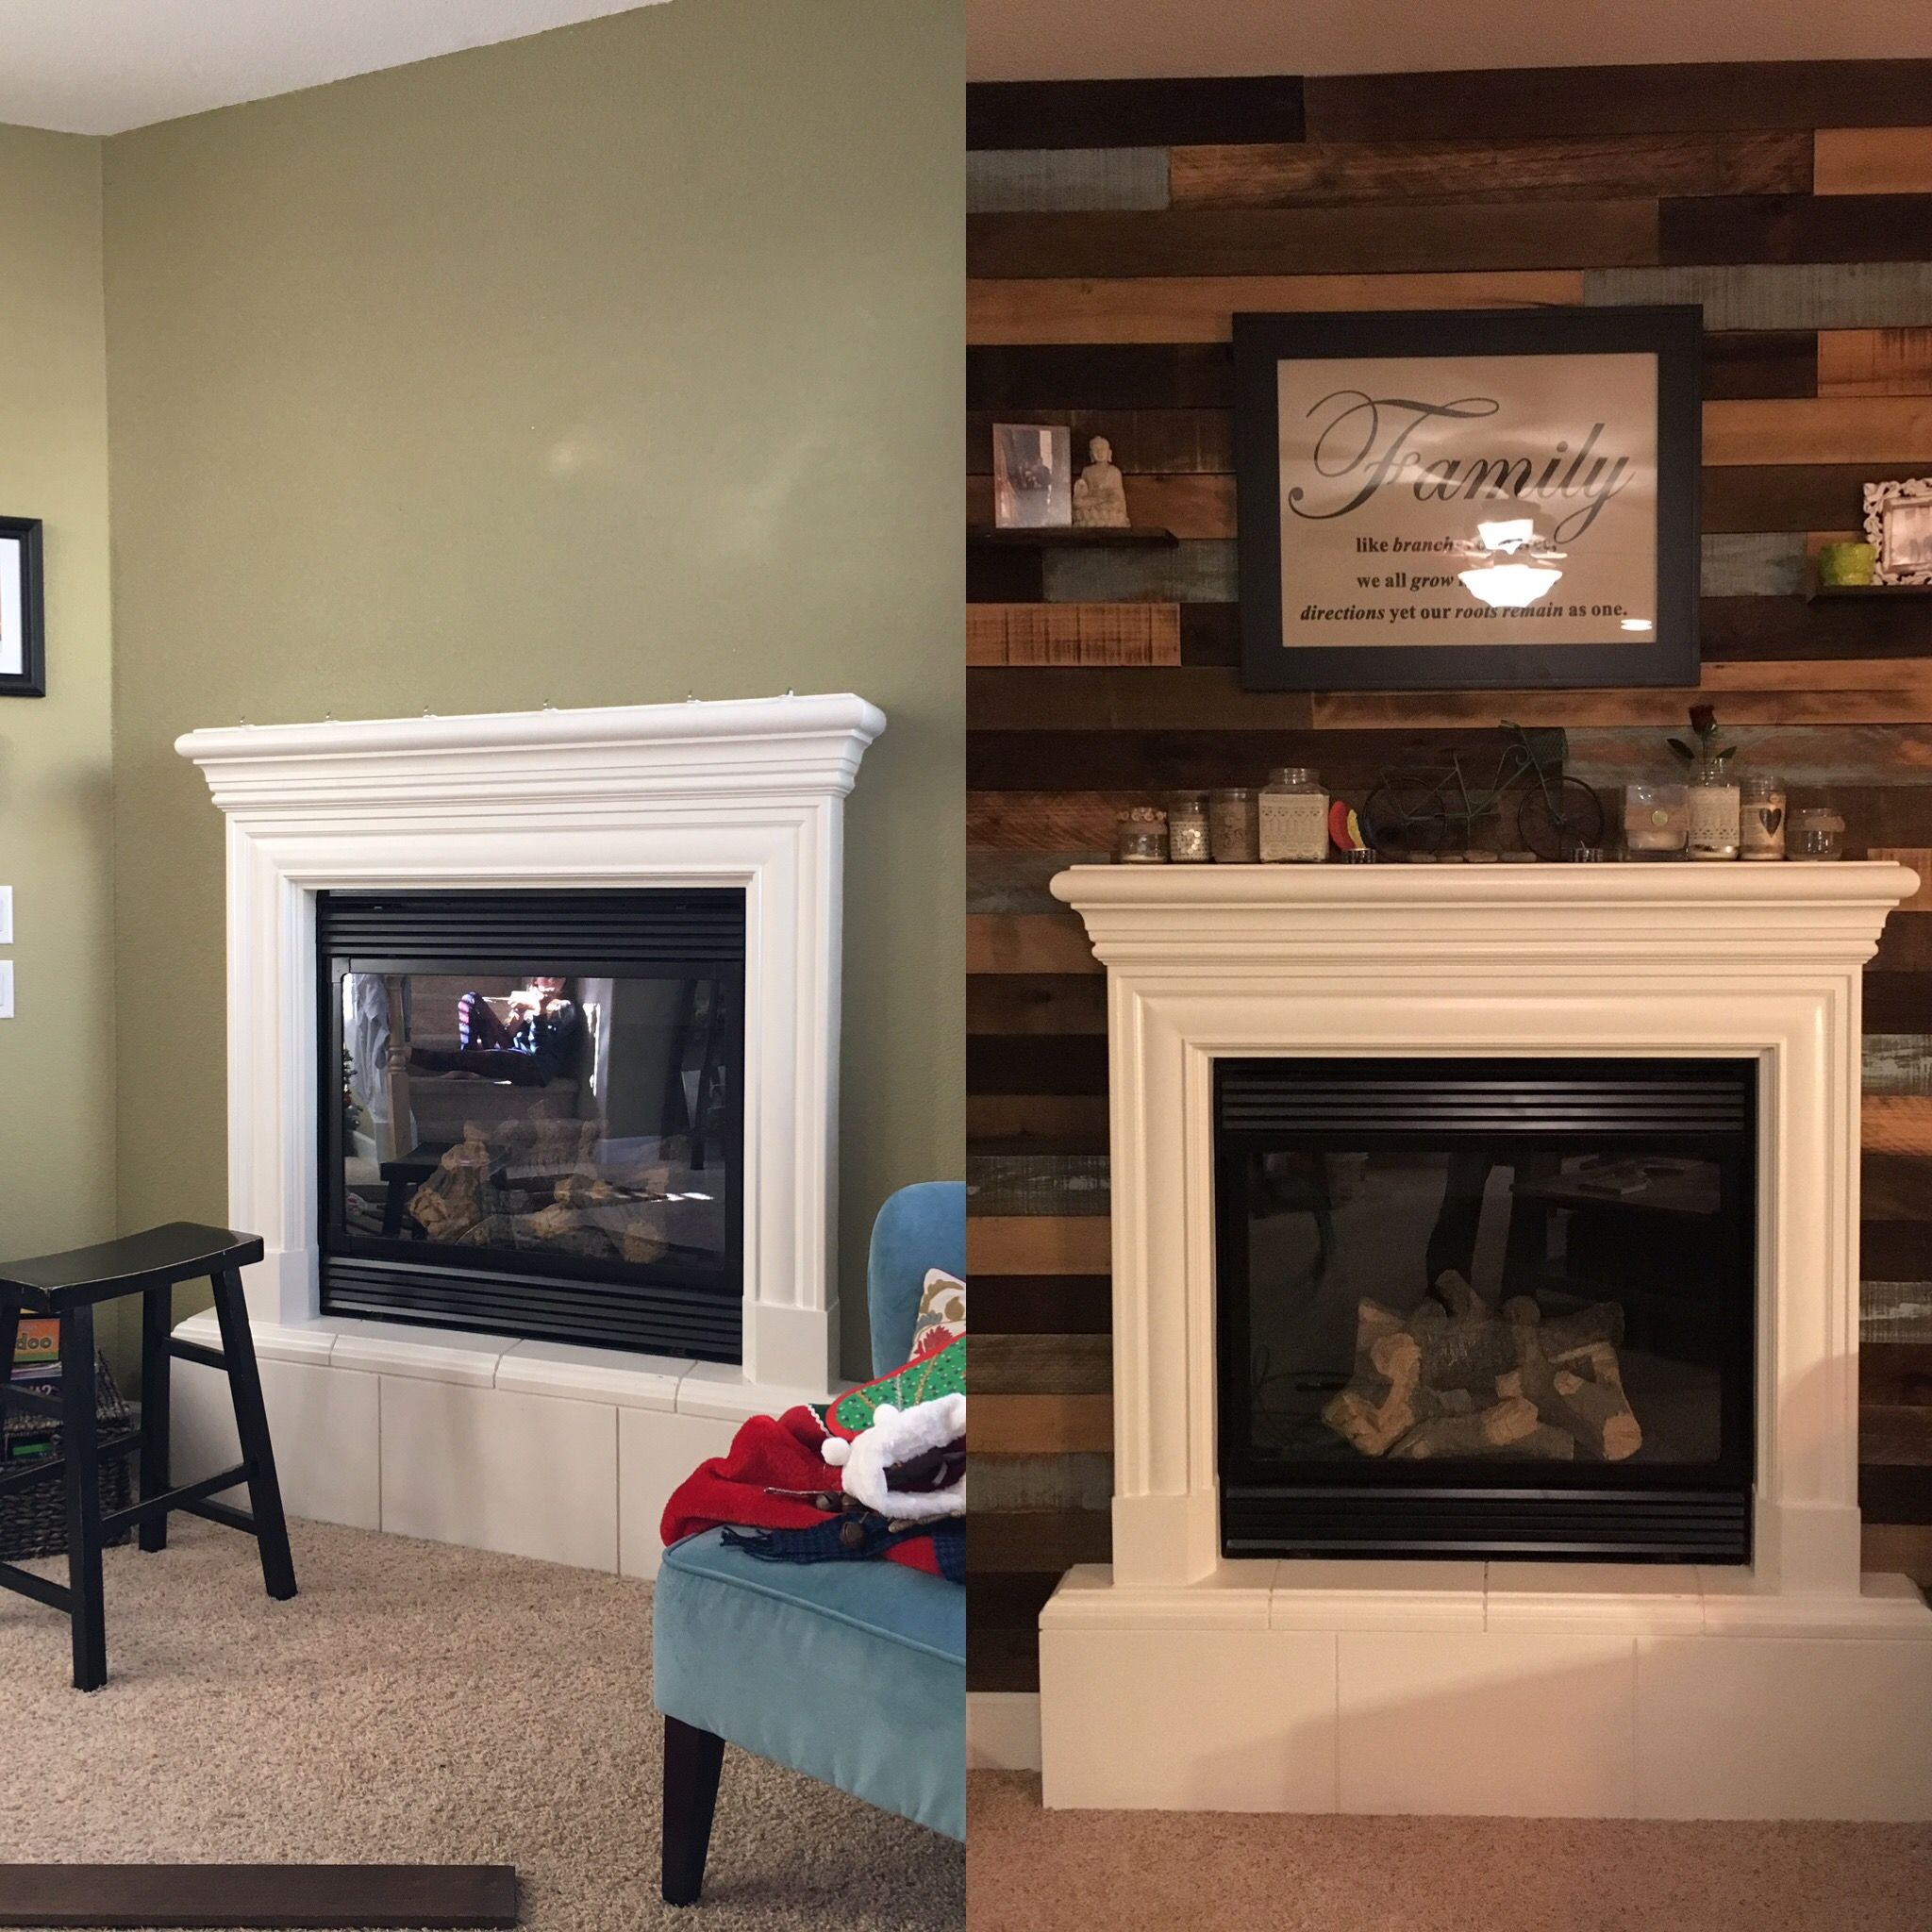 Adding A Fireplace to An Interior Wall Fresh Reclaimed Wood Fireplace Wall for the Home